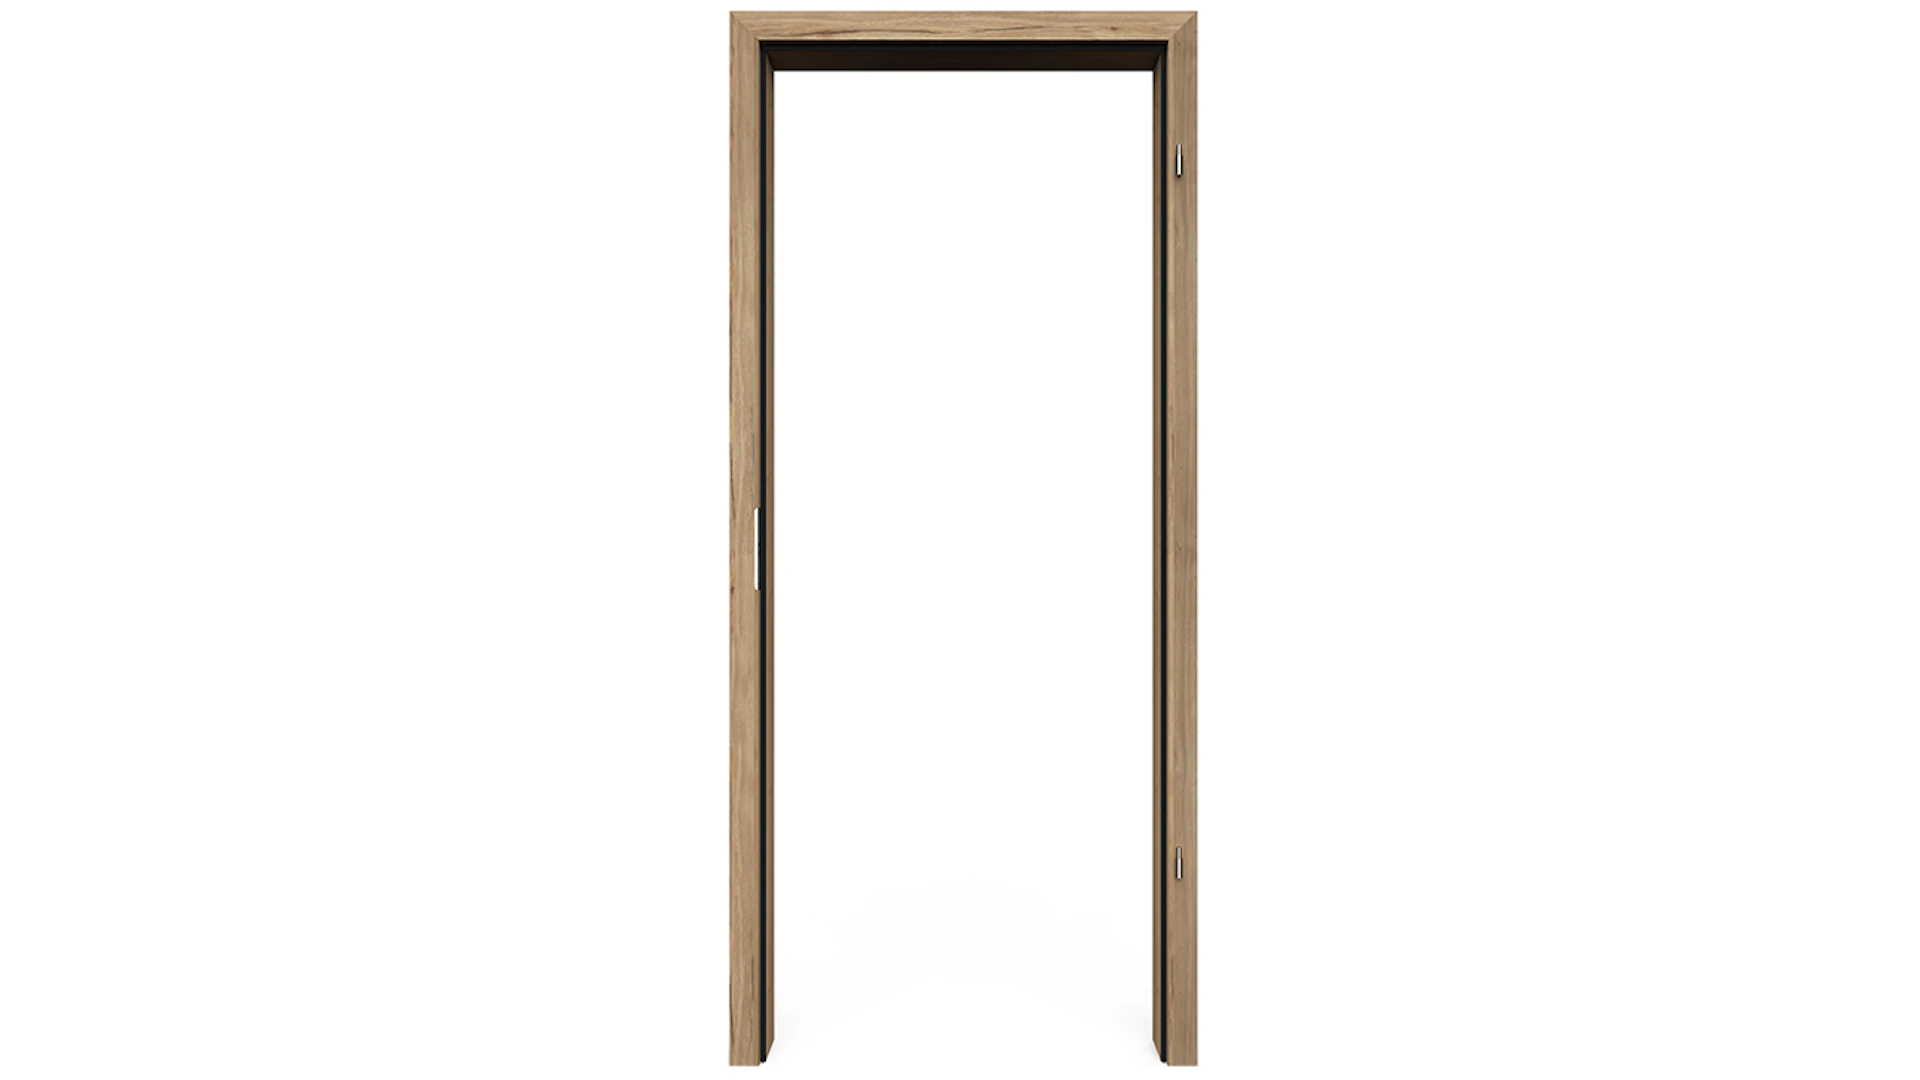 planeo Standard Door frame Rounded edge - CPL Oak Vintage - 1985 x 610 x 100 mm DIN right